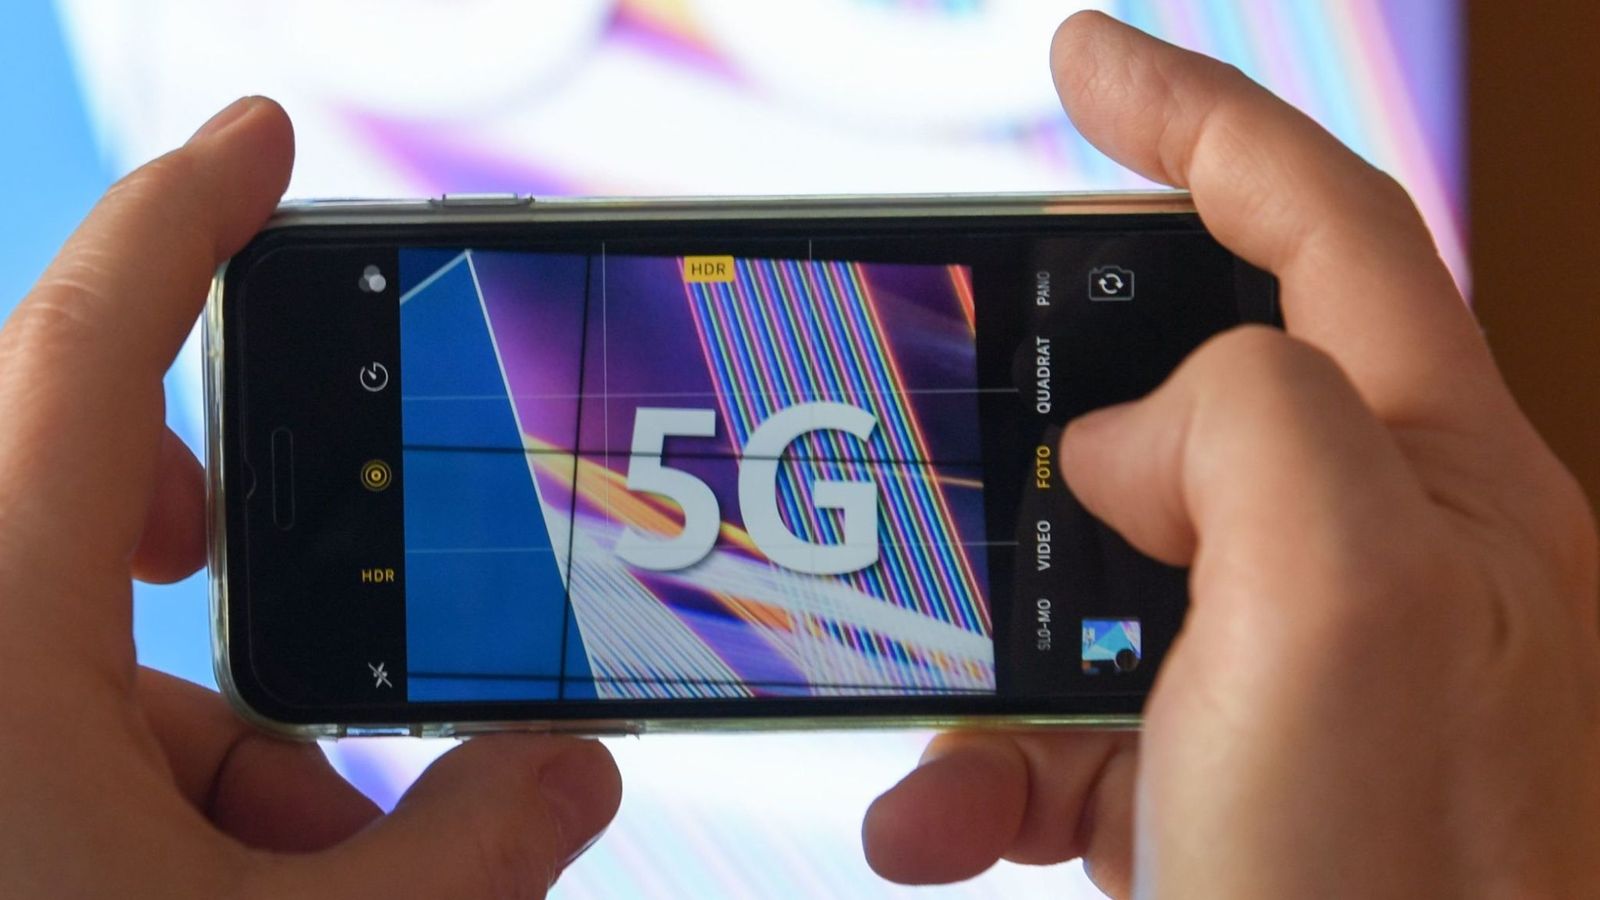 5G Technology: Does it pose health risks?